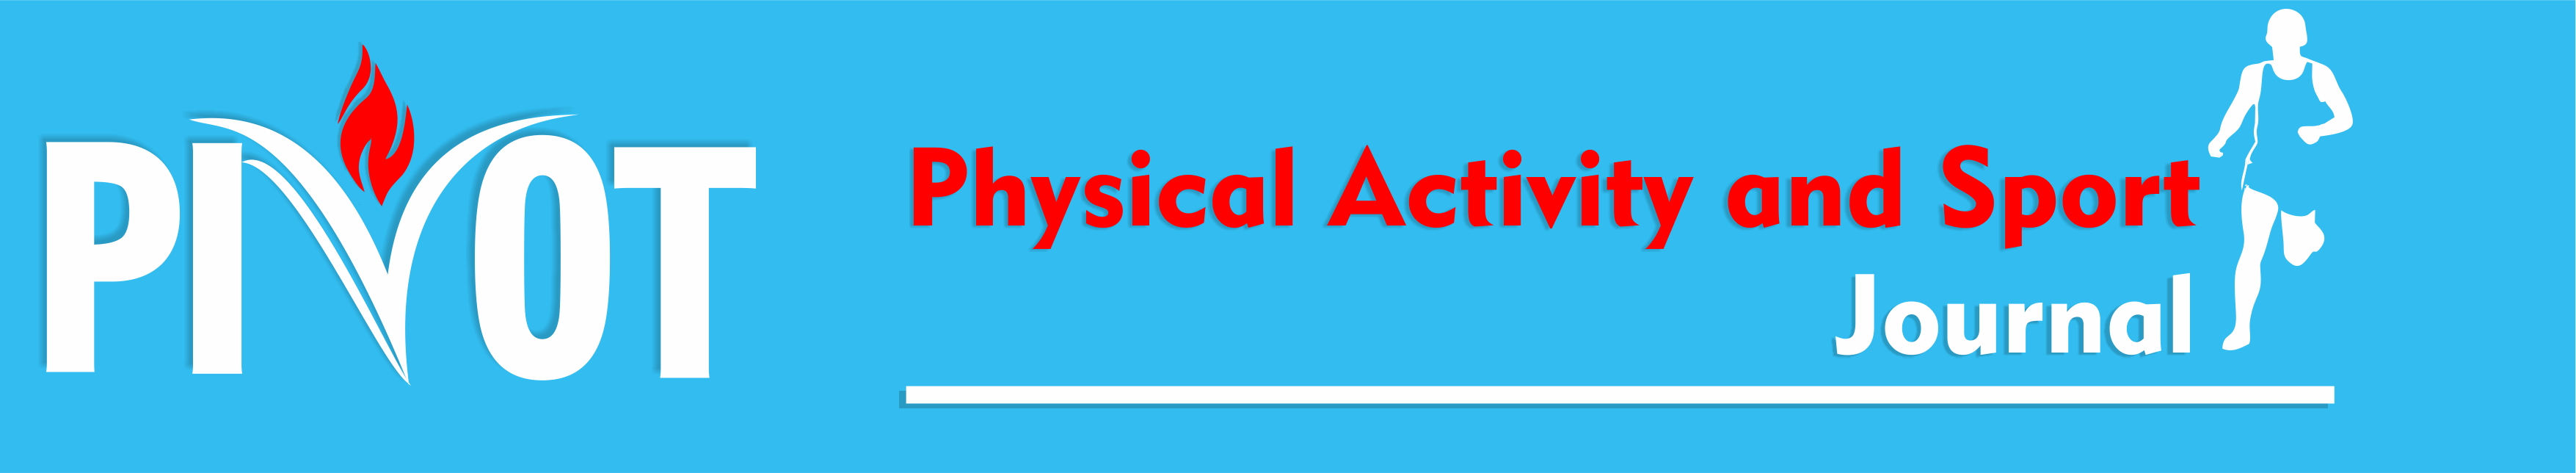 Physical Activity and Sport Journal (PIVOT)